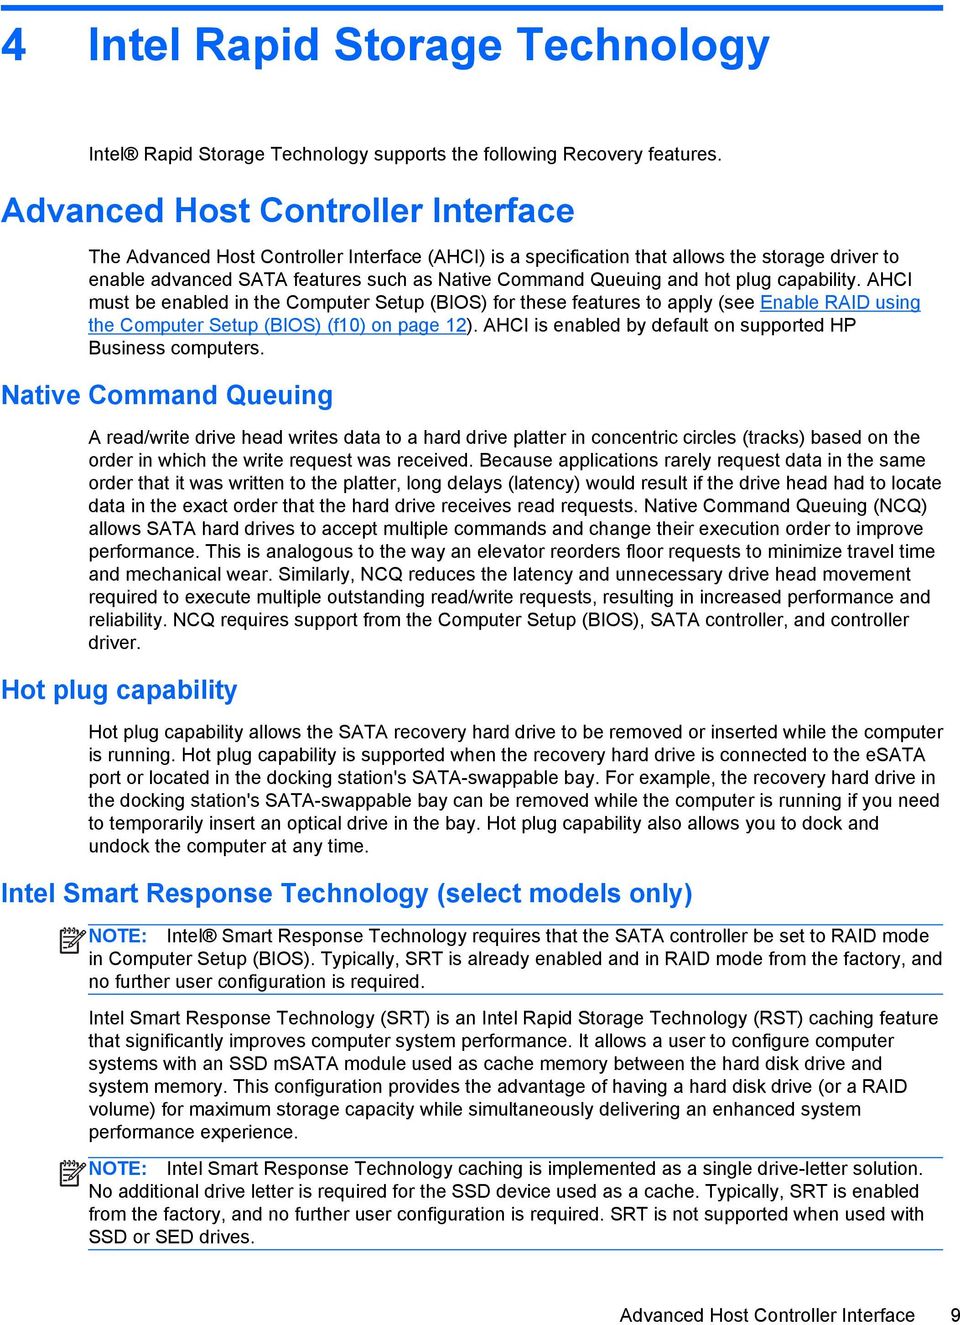 hot plug capability. AHCI must be enabled in the Computer Setup (BIOS) for these features to apply (see Enable RAID using the Computer Setup (BIOS) (f10) on page 12).